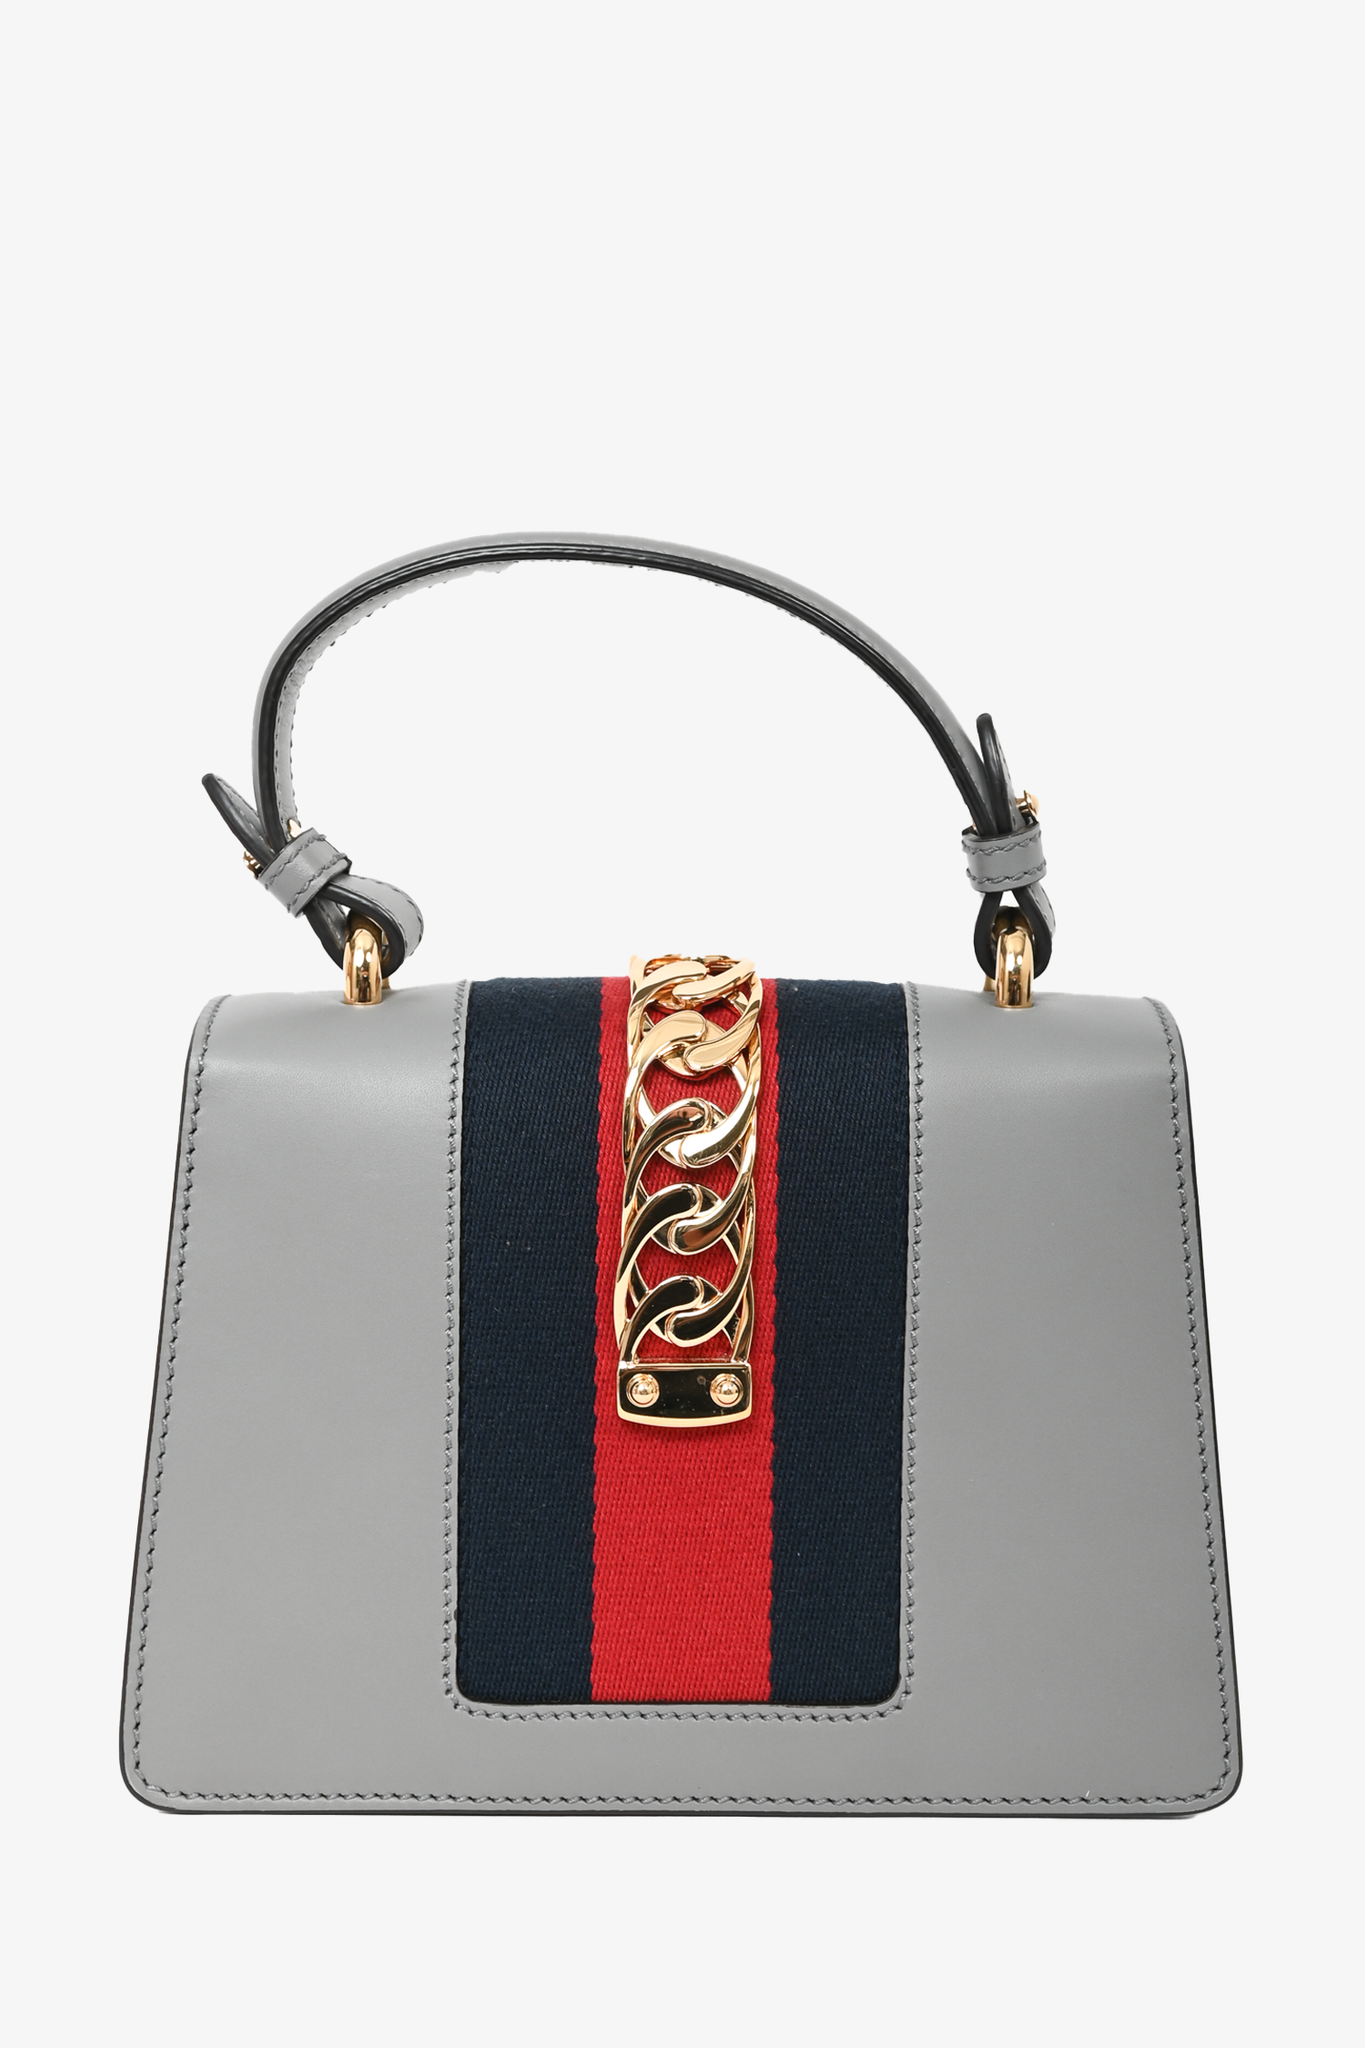 Gucci Grey/Web Leather Sylvie with 2 Straps Crossbody Bag